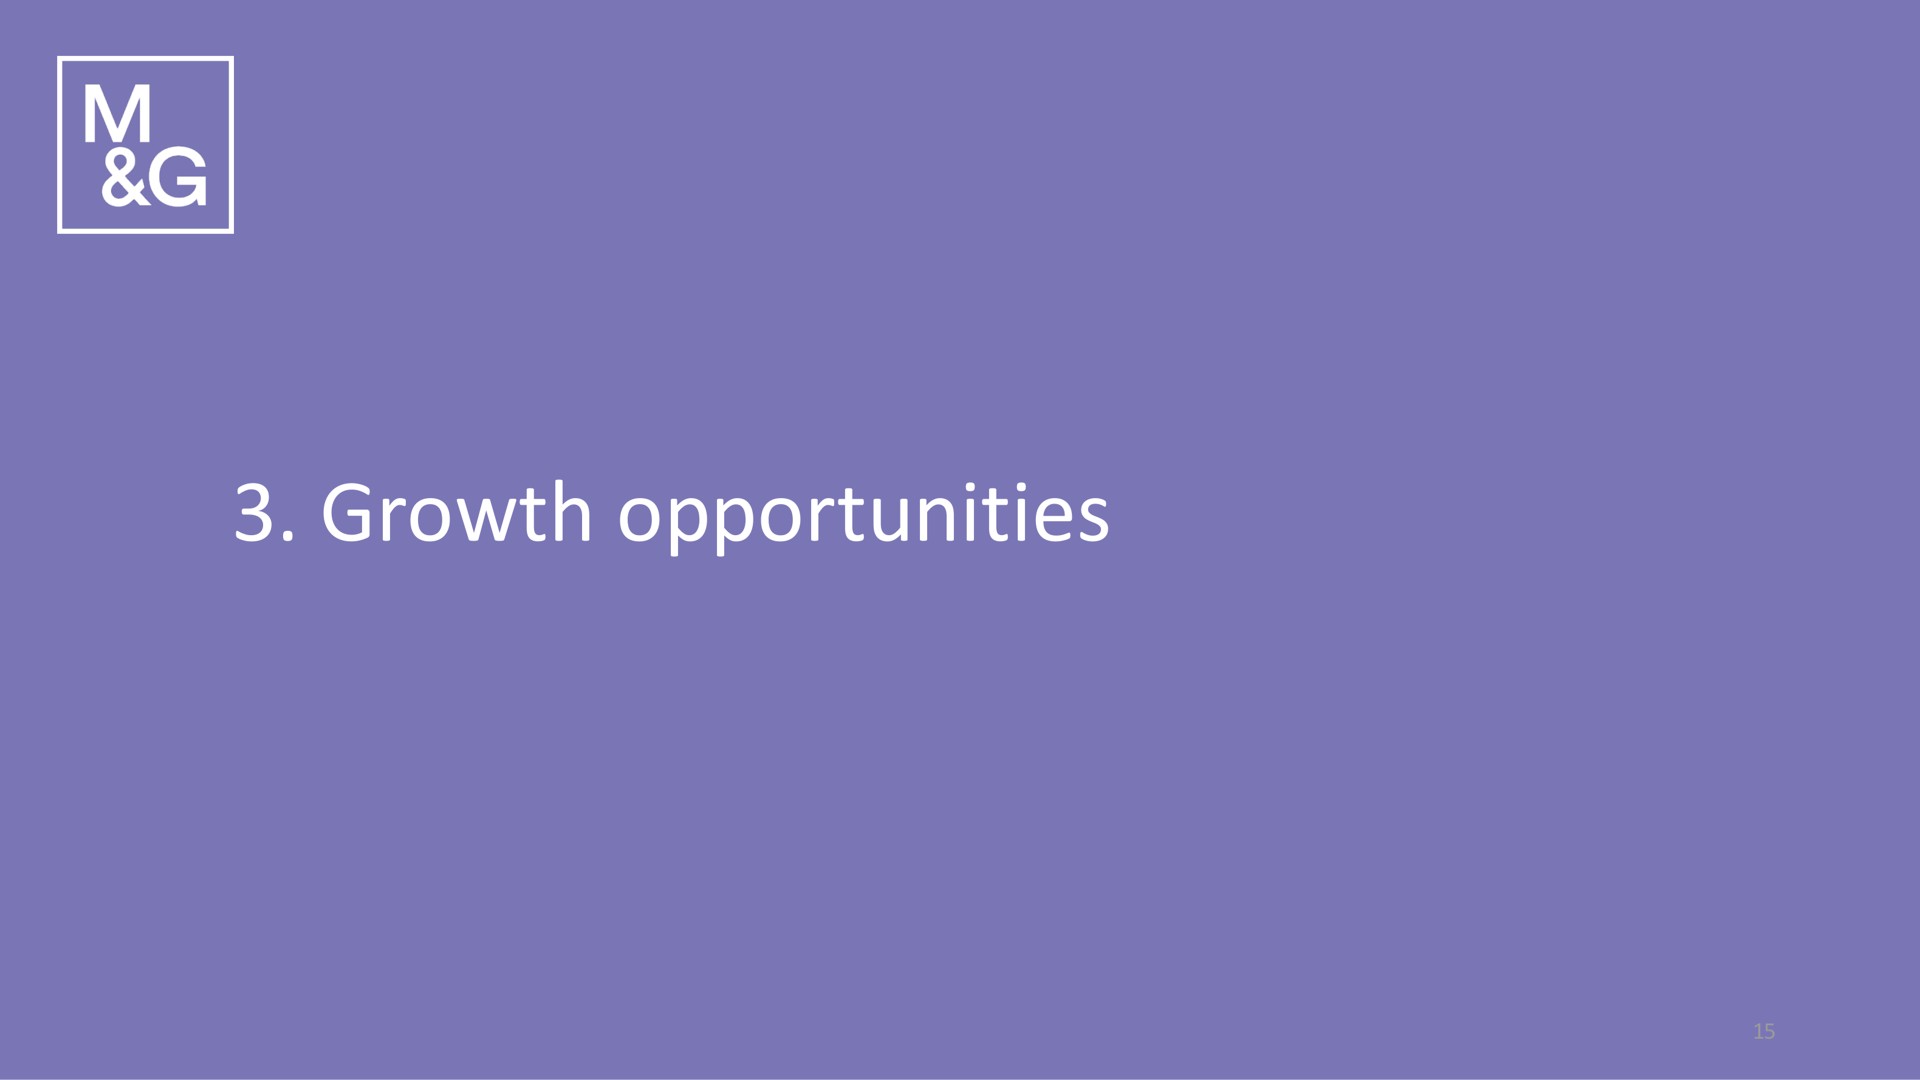 growth opportunities | M&G